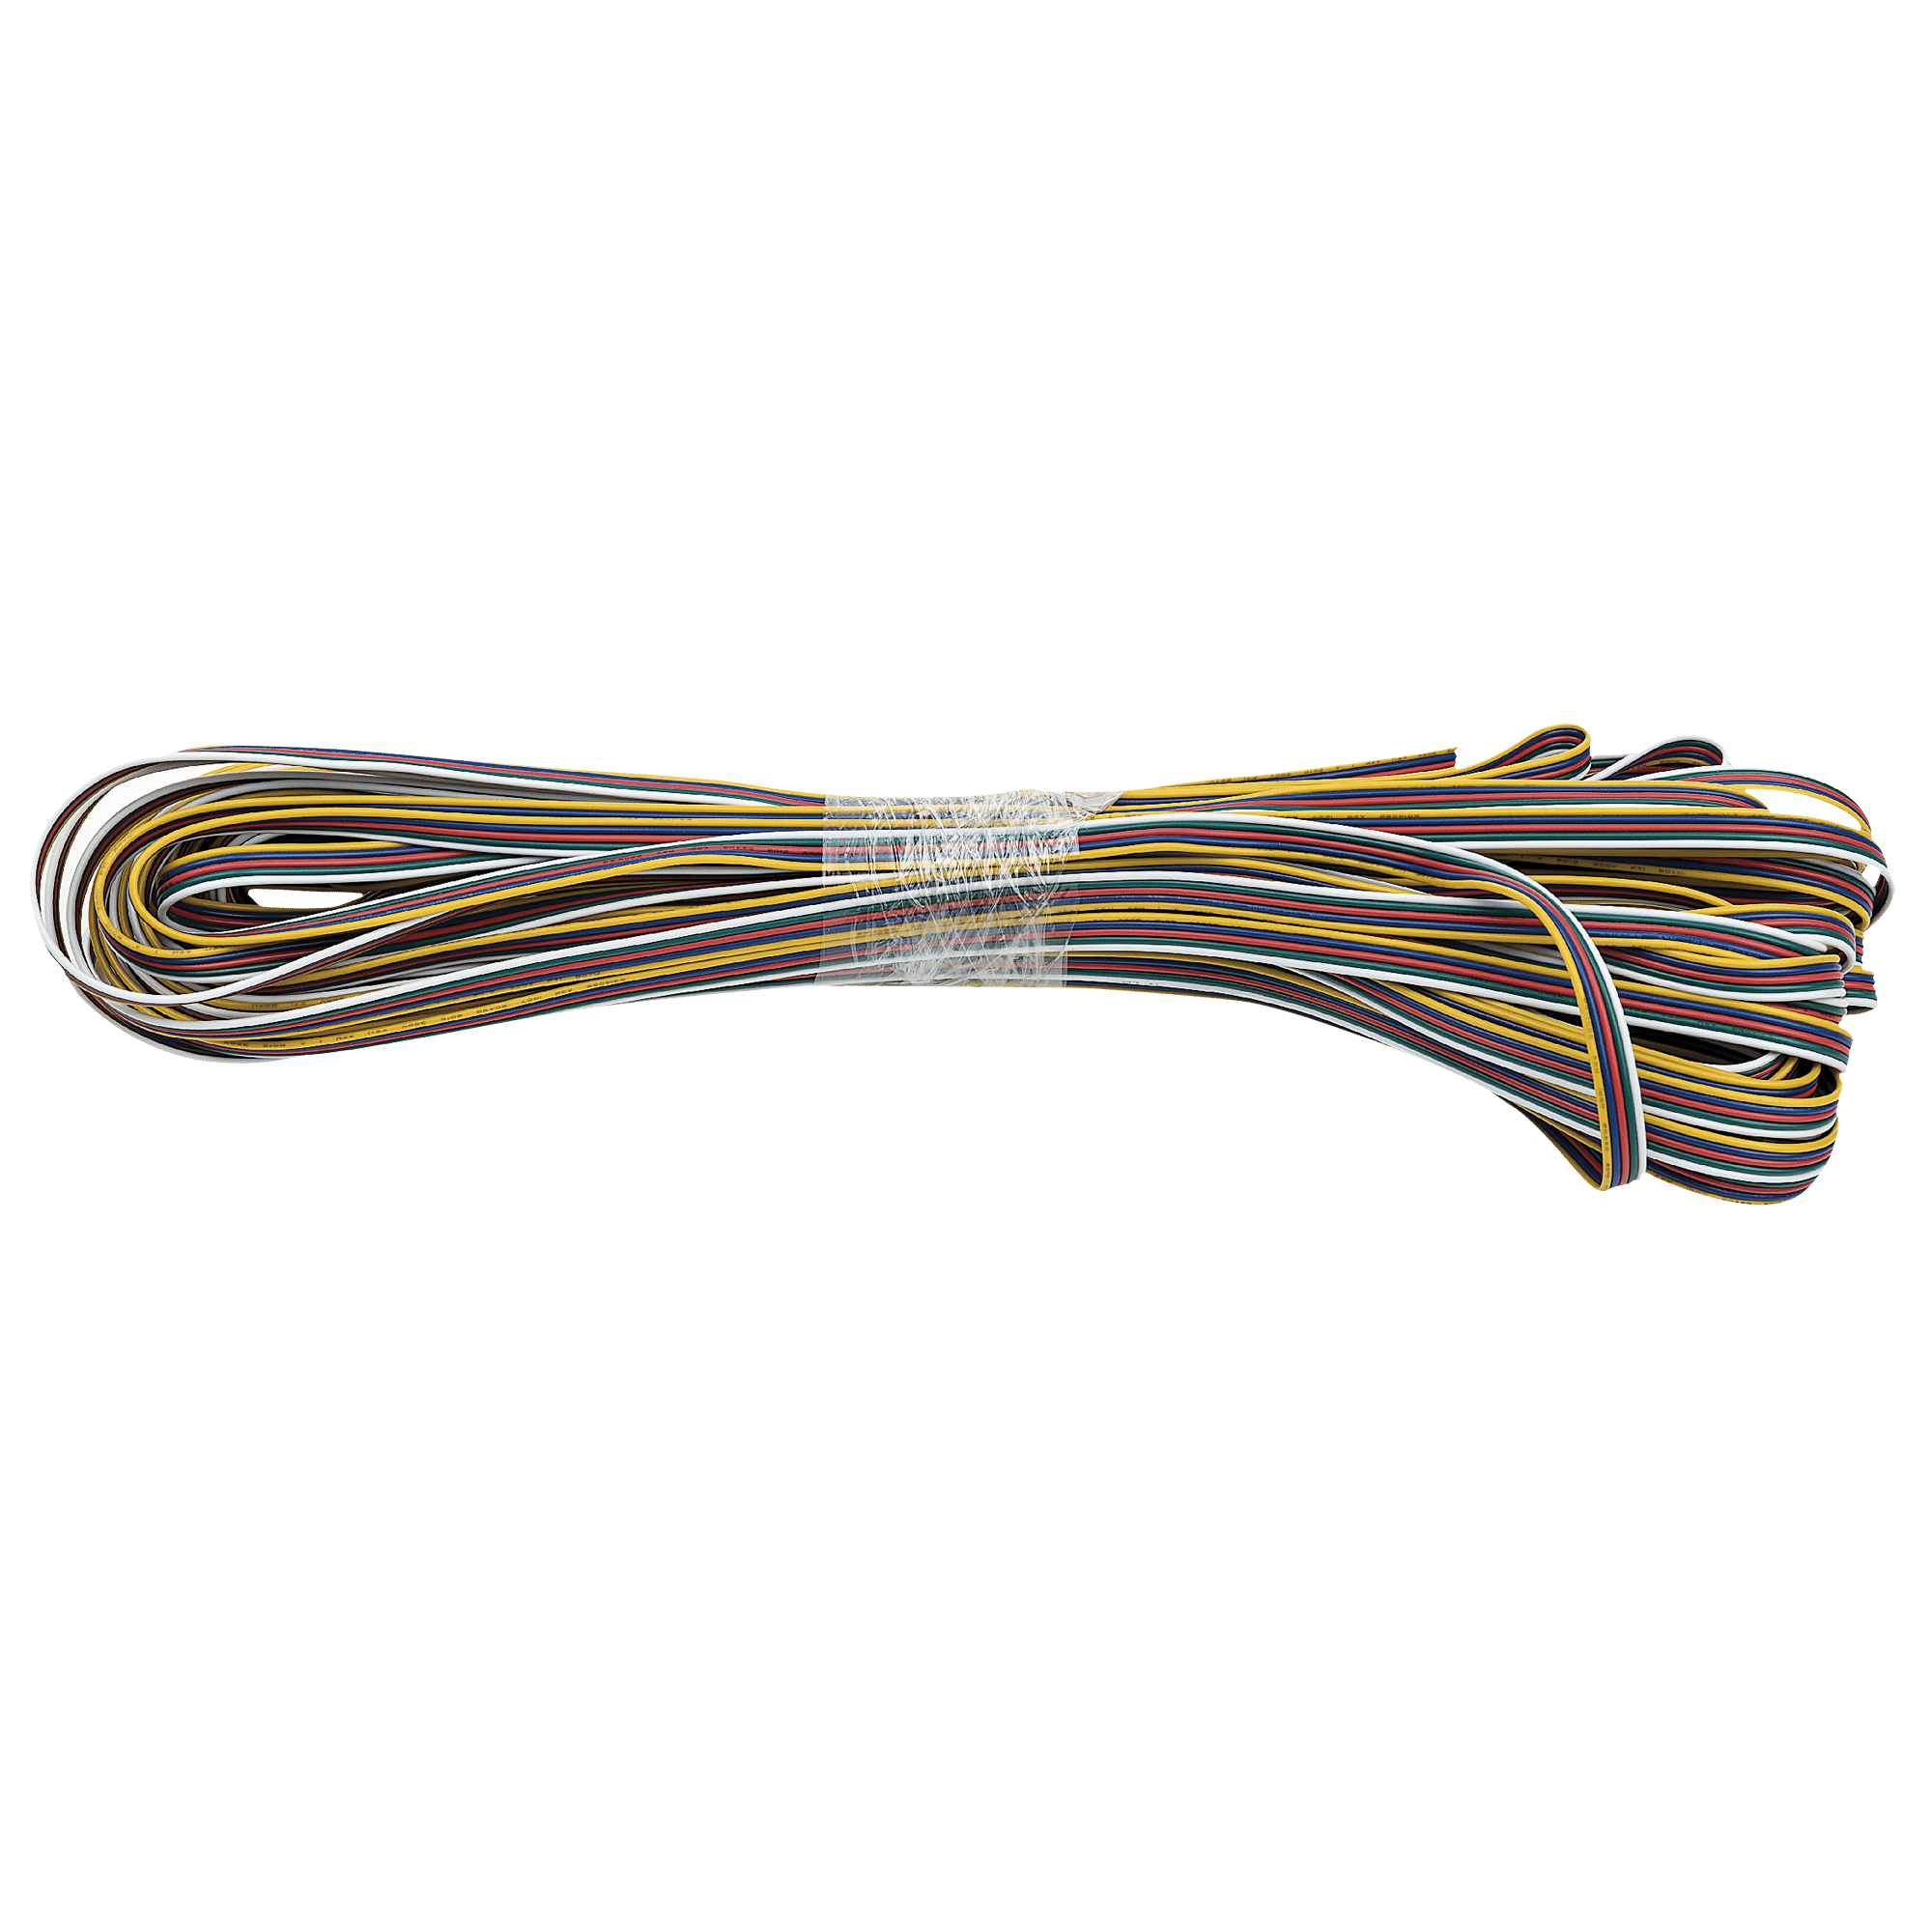 RGBW Flat Cable - Onlinediscowinkel.nl